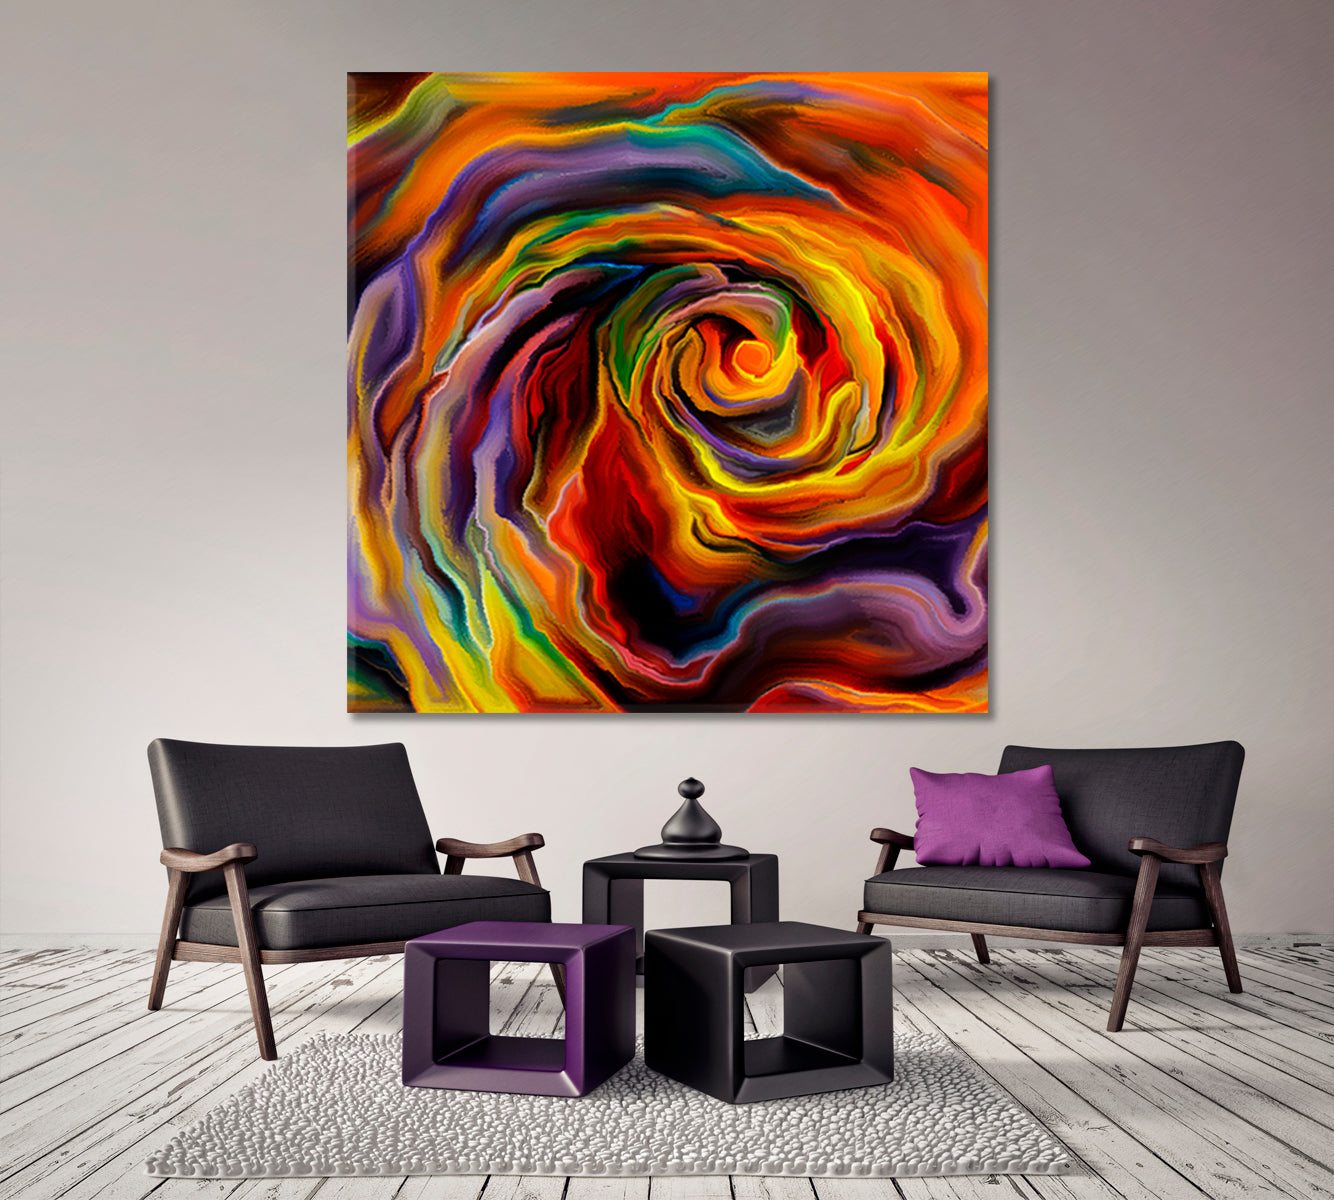 FORMS Magical Abstract Vivid Whirlpool - Square Panel Contemporary Art Artesty   